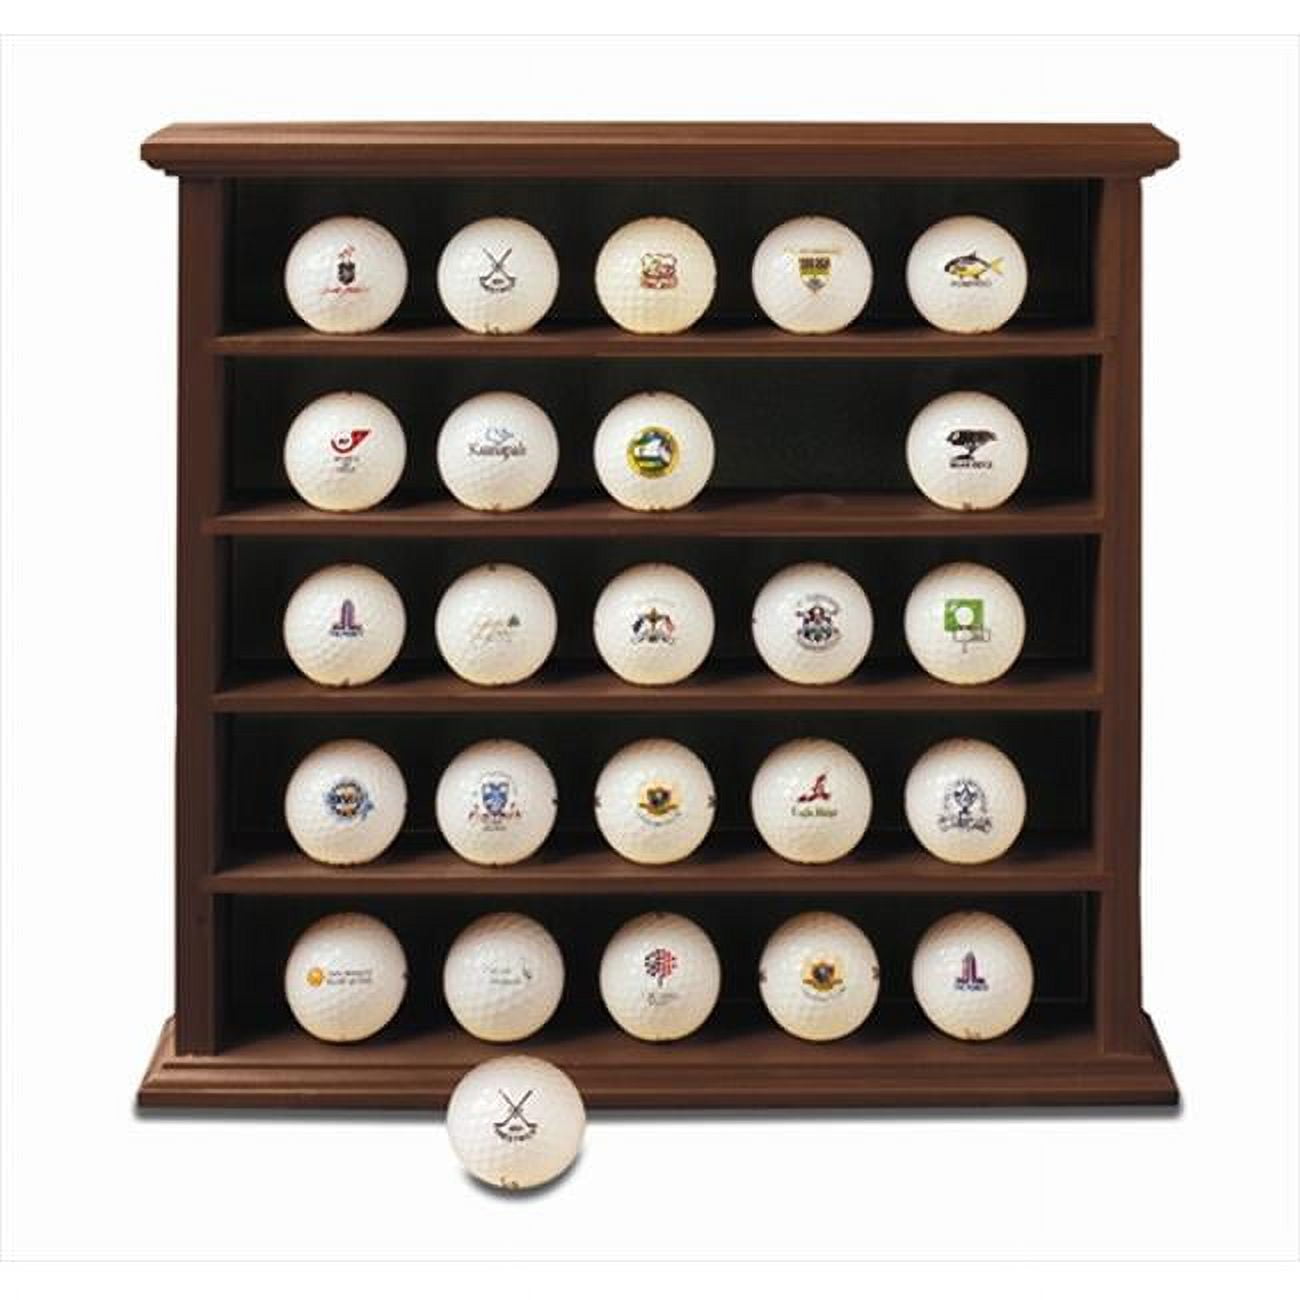 Product Review: Golf Ball Display Cabinet - WiscoGolfAddict